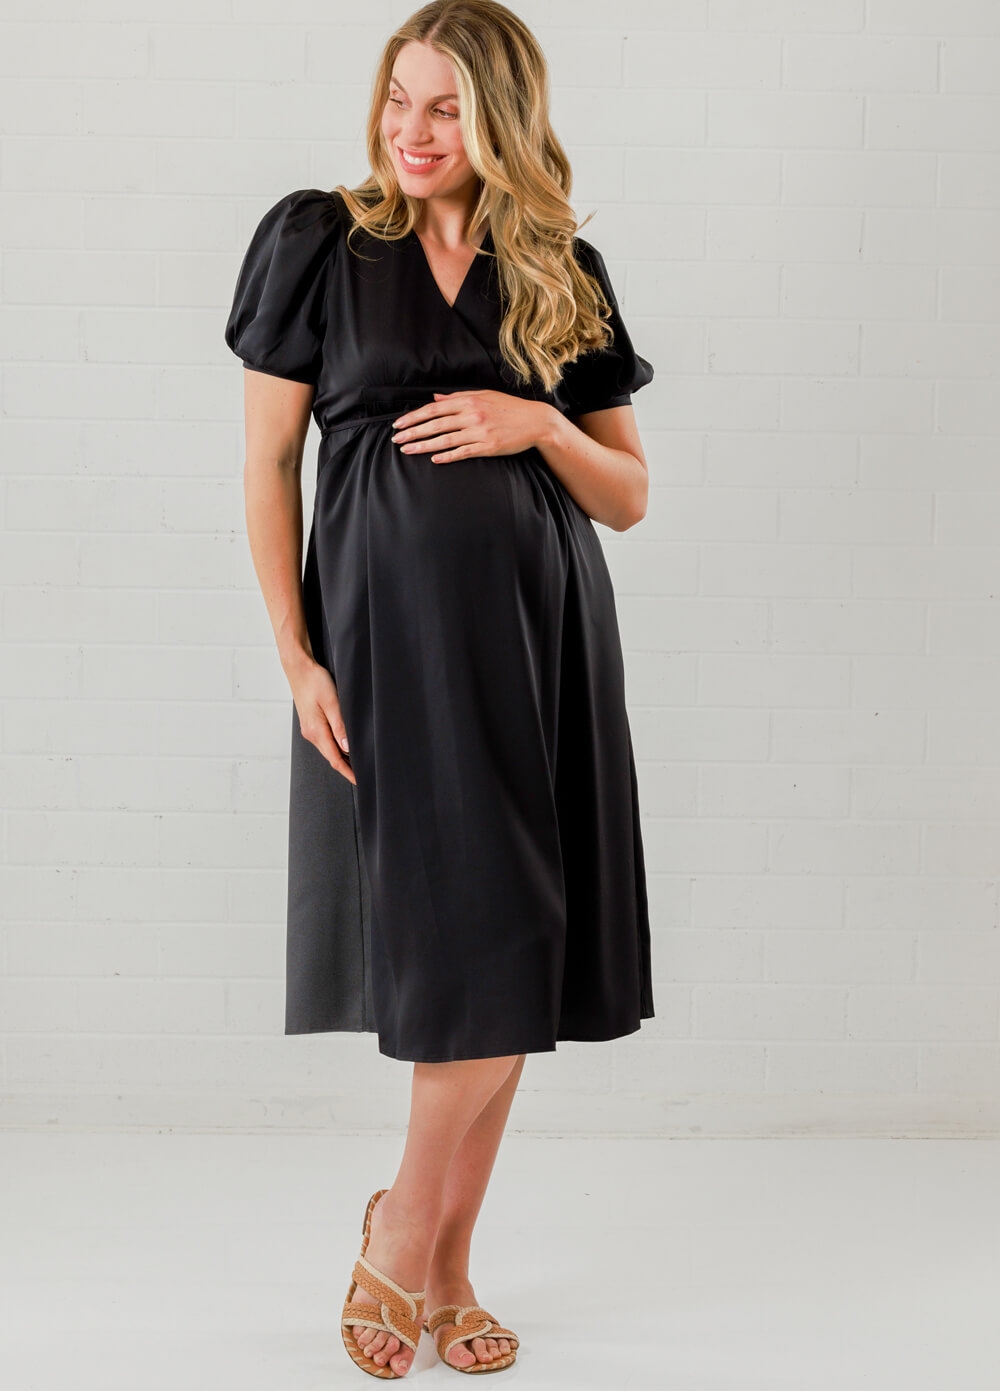 Lait & Co - Anna-Elea Maternity Cocktail Party Dress in Black